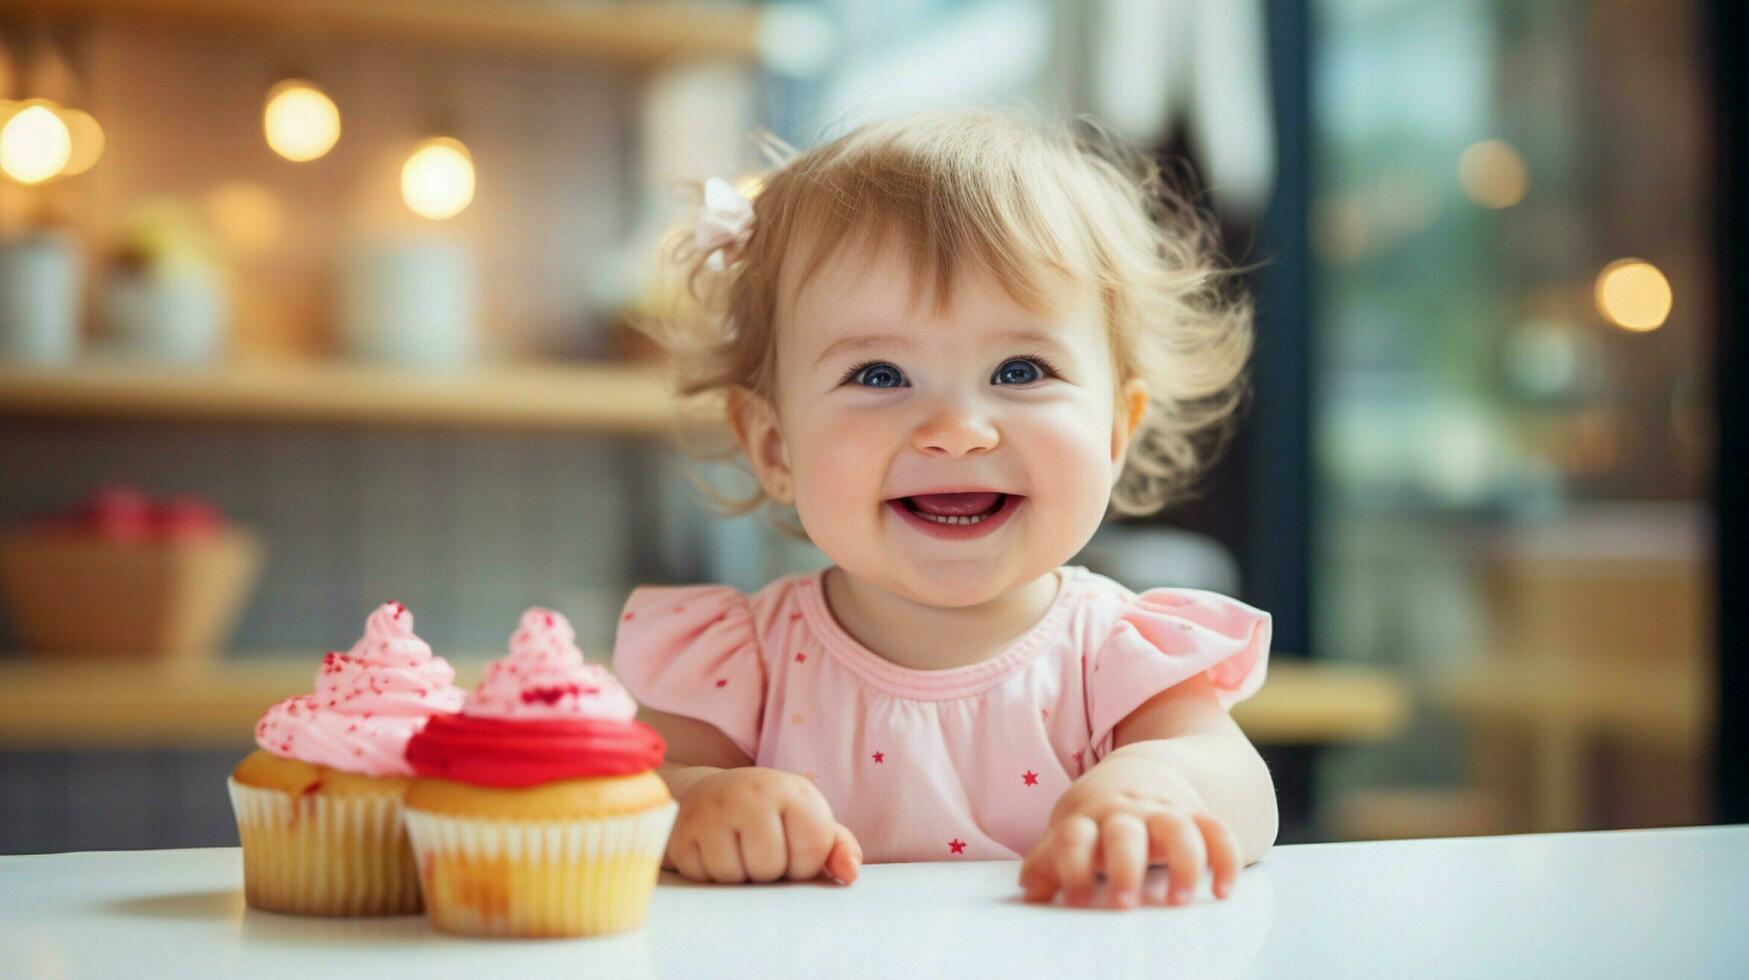 cute baby girl smiling while eating sweet cupcake indoors photo